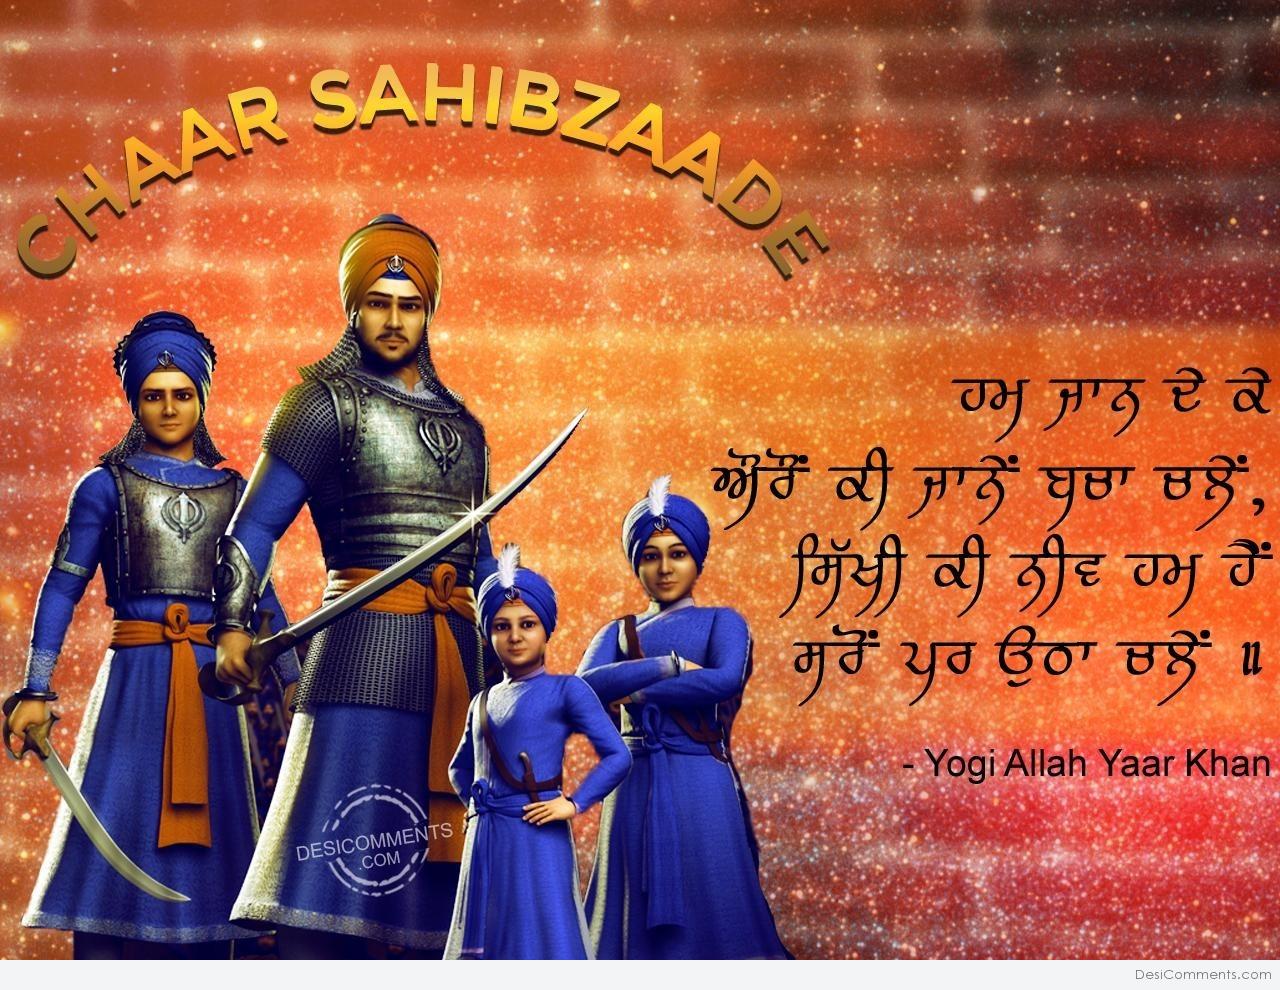 Chaar Sahibzaade streaming where to watch online